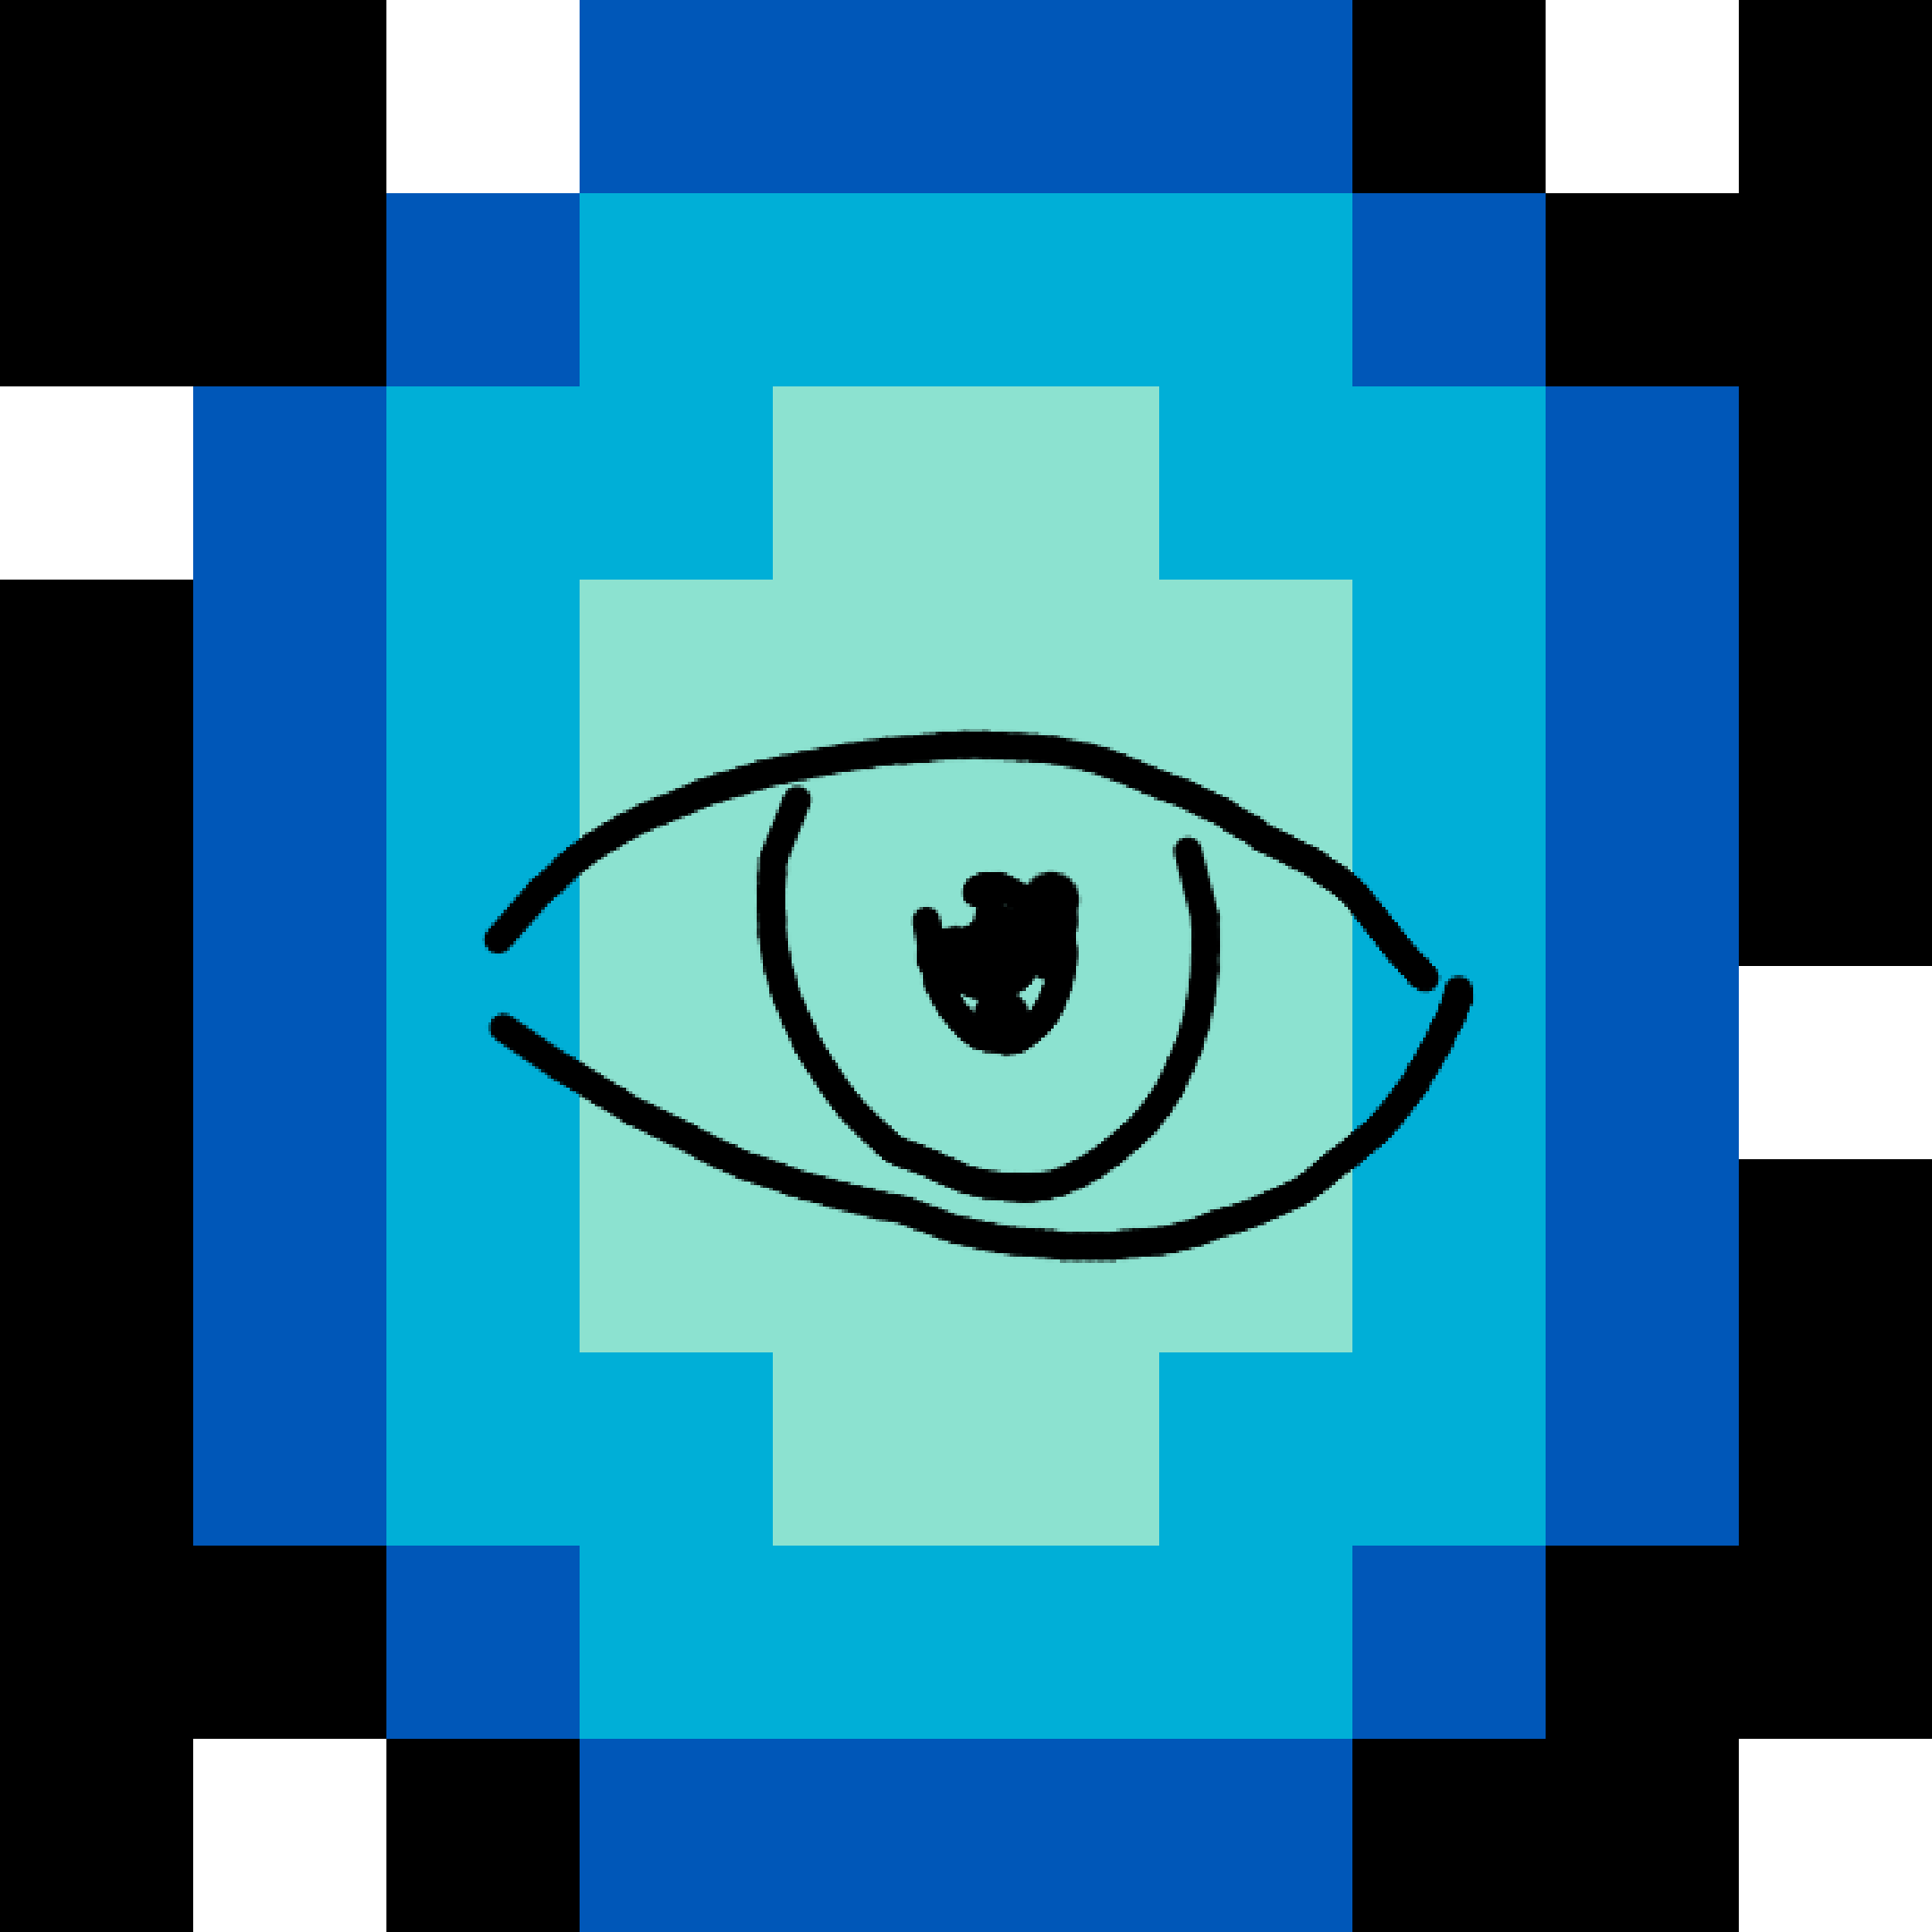 A pixel drawing of a stylized eye in shades of blue, with another eye drawn over it in black